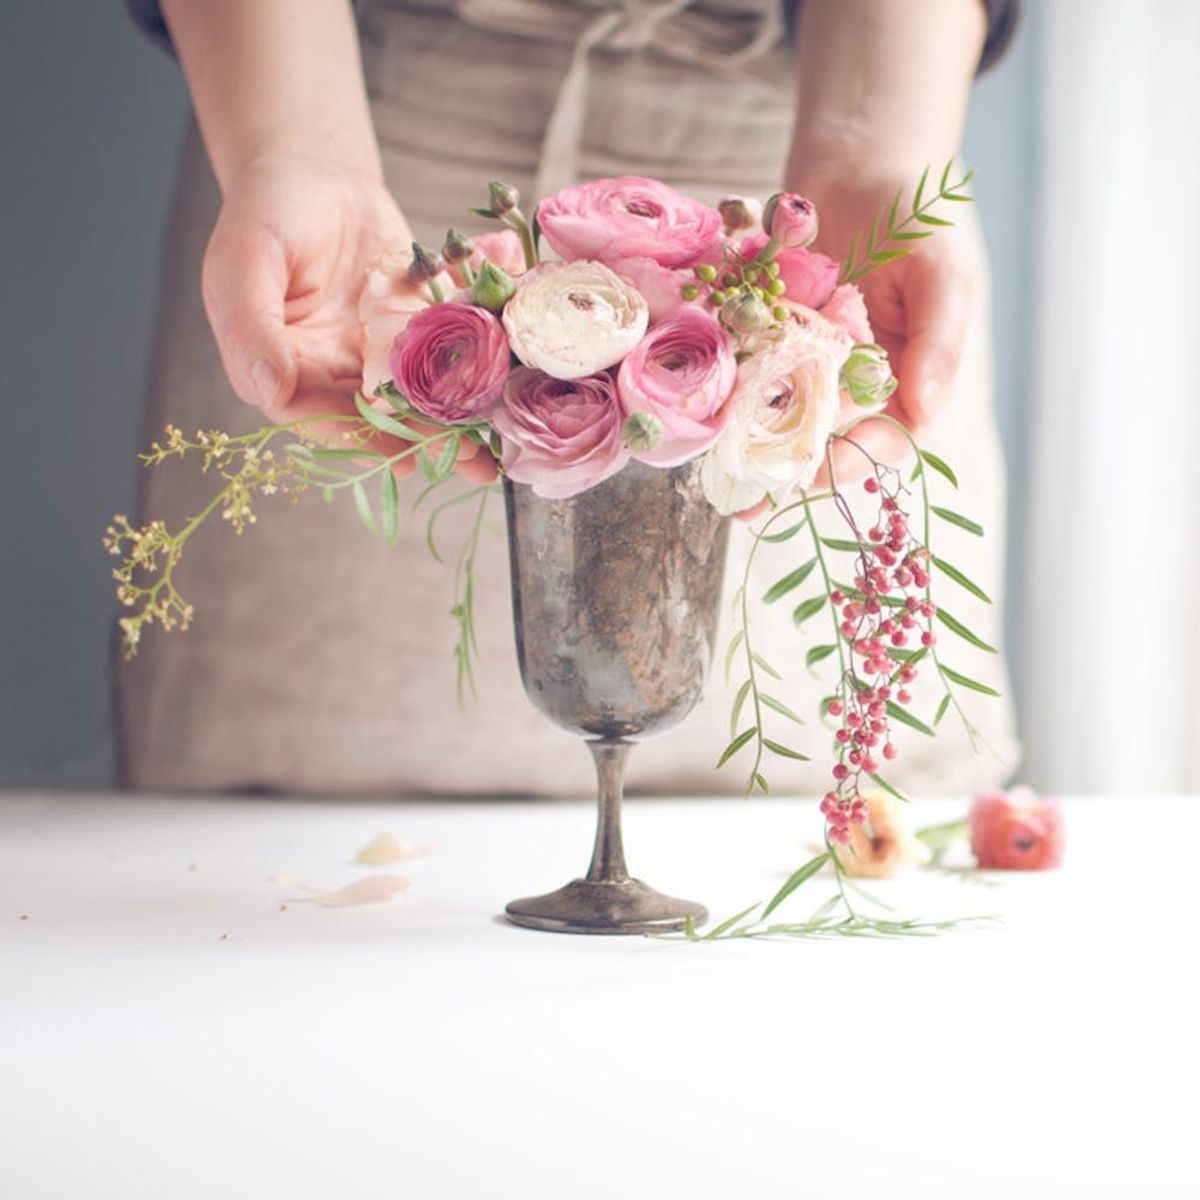 How to Cut Wedding Costs by Doing Your Own Floral Arrangements